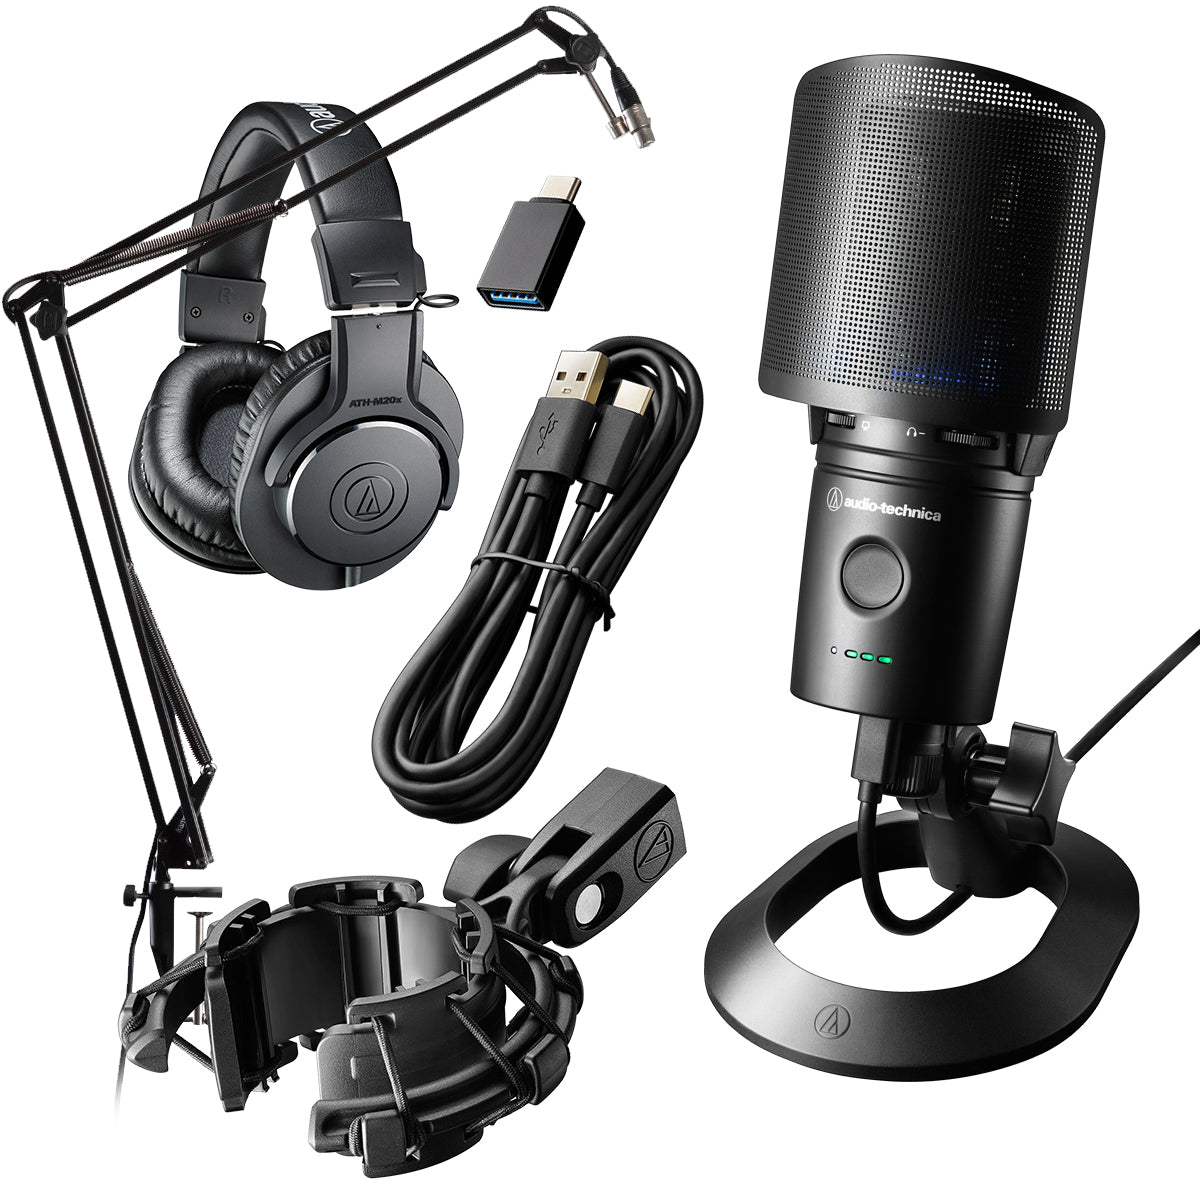  Audio-Technica AT2020USB+ Cardioid Condenser USB Microphone,  With Built-In Headphone Jack & Volume Control, Perfect for Content Creators  (Black) : Musical Instruments